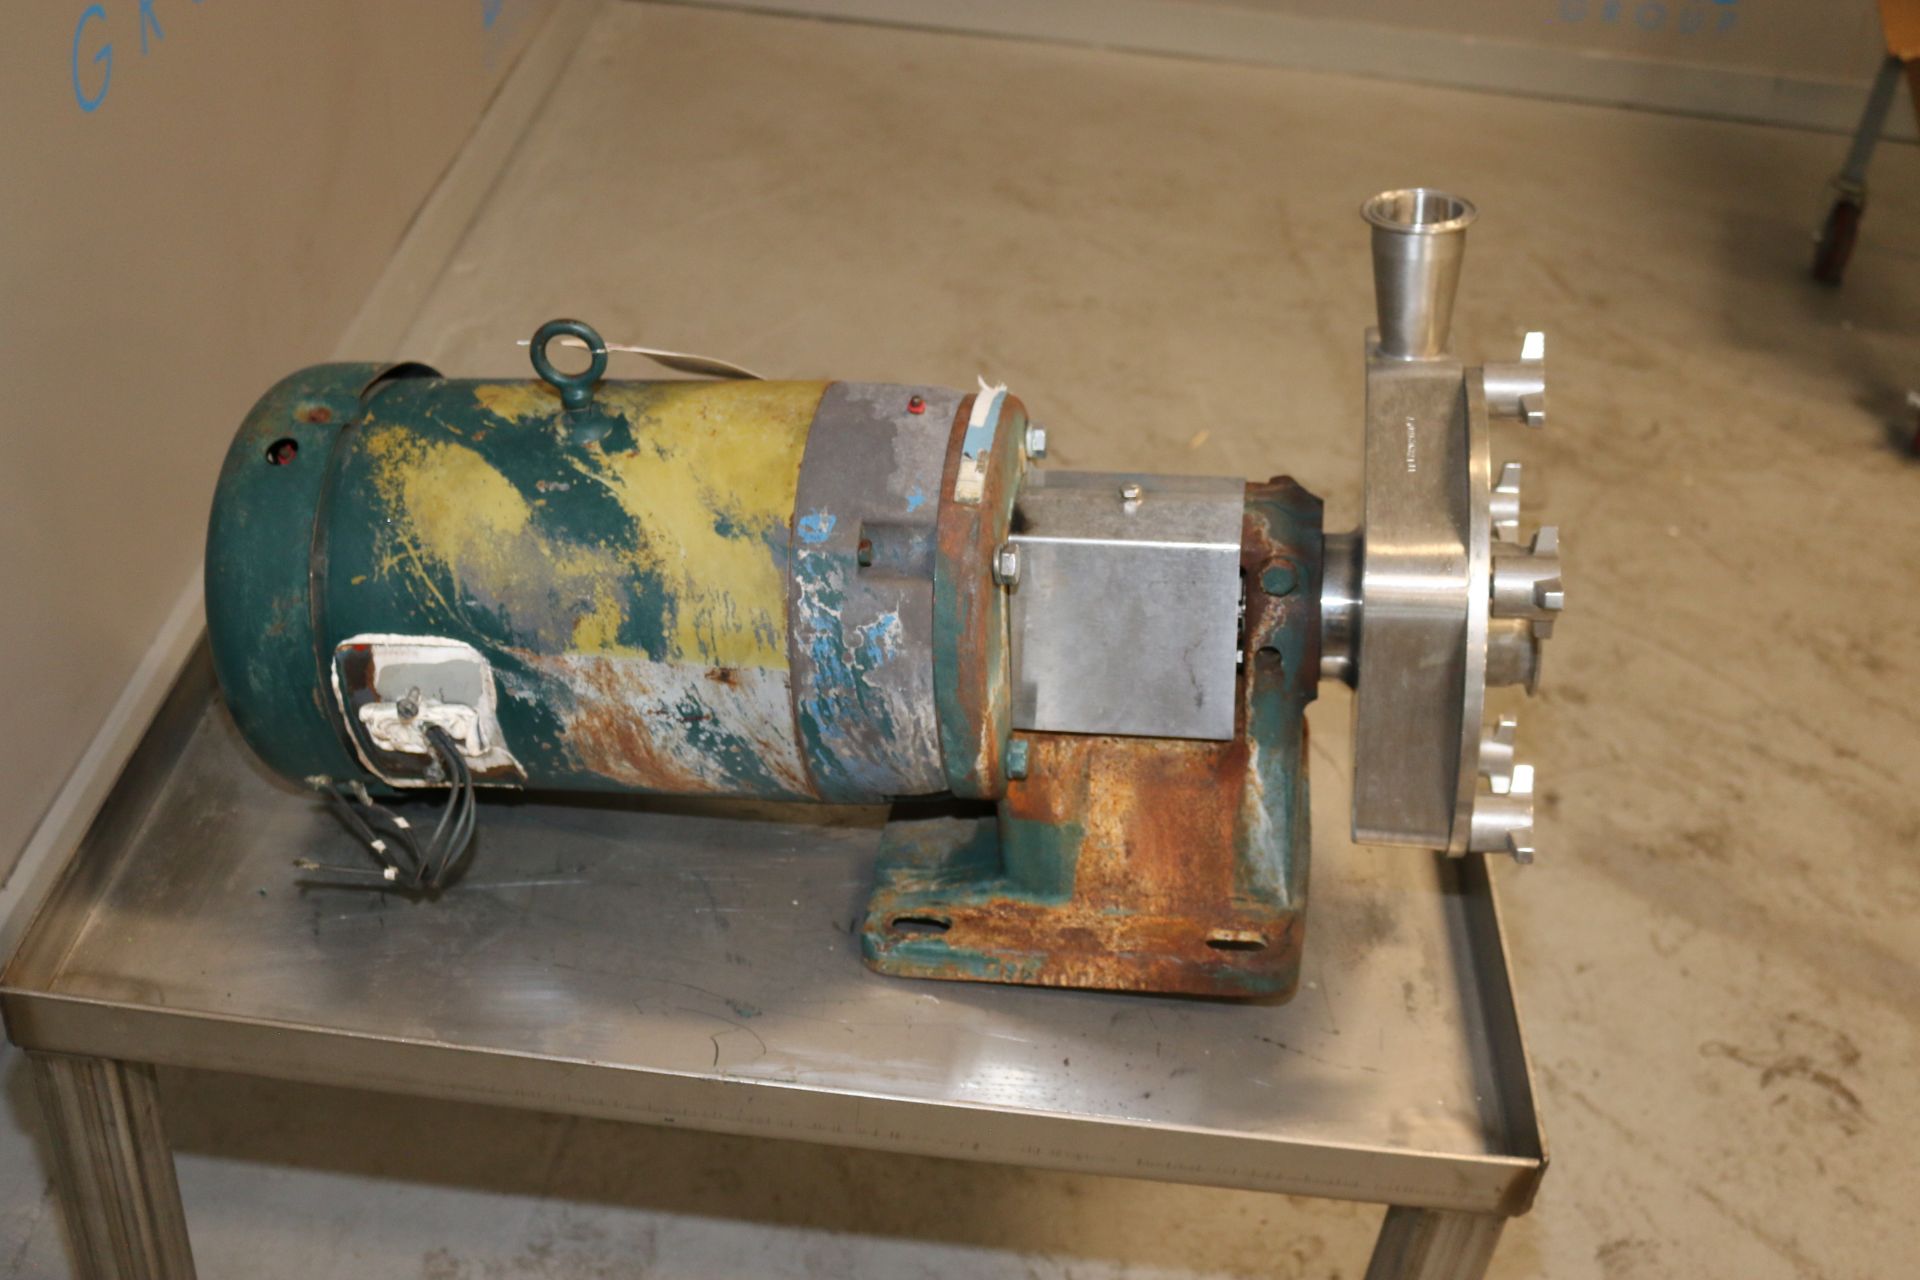 Fristam Aprox. 10 hp Centrifugal Pump, S/N FP17320203057, with Aprox. 2" x 3" Clamp Type Inlet/ - Image 3 of 6